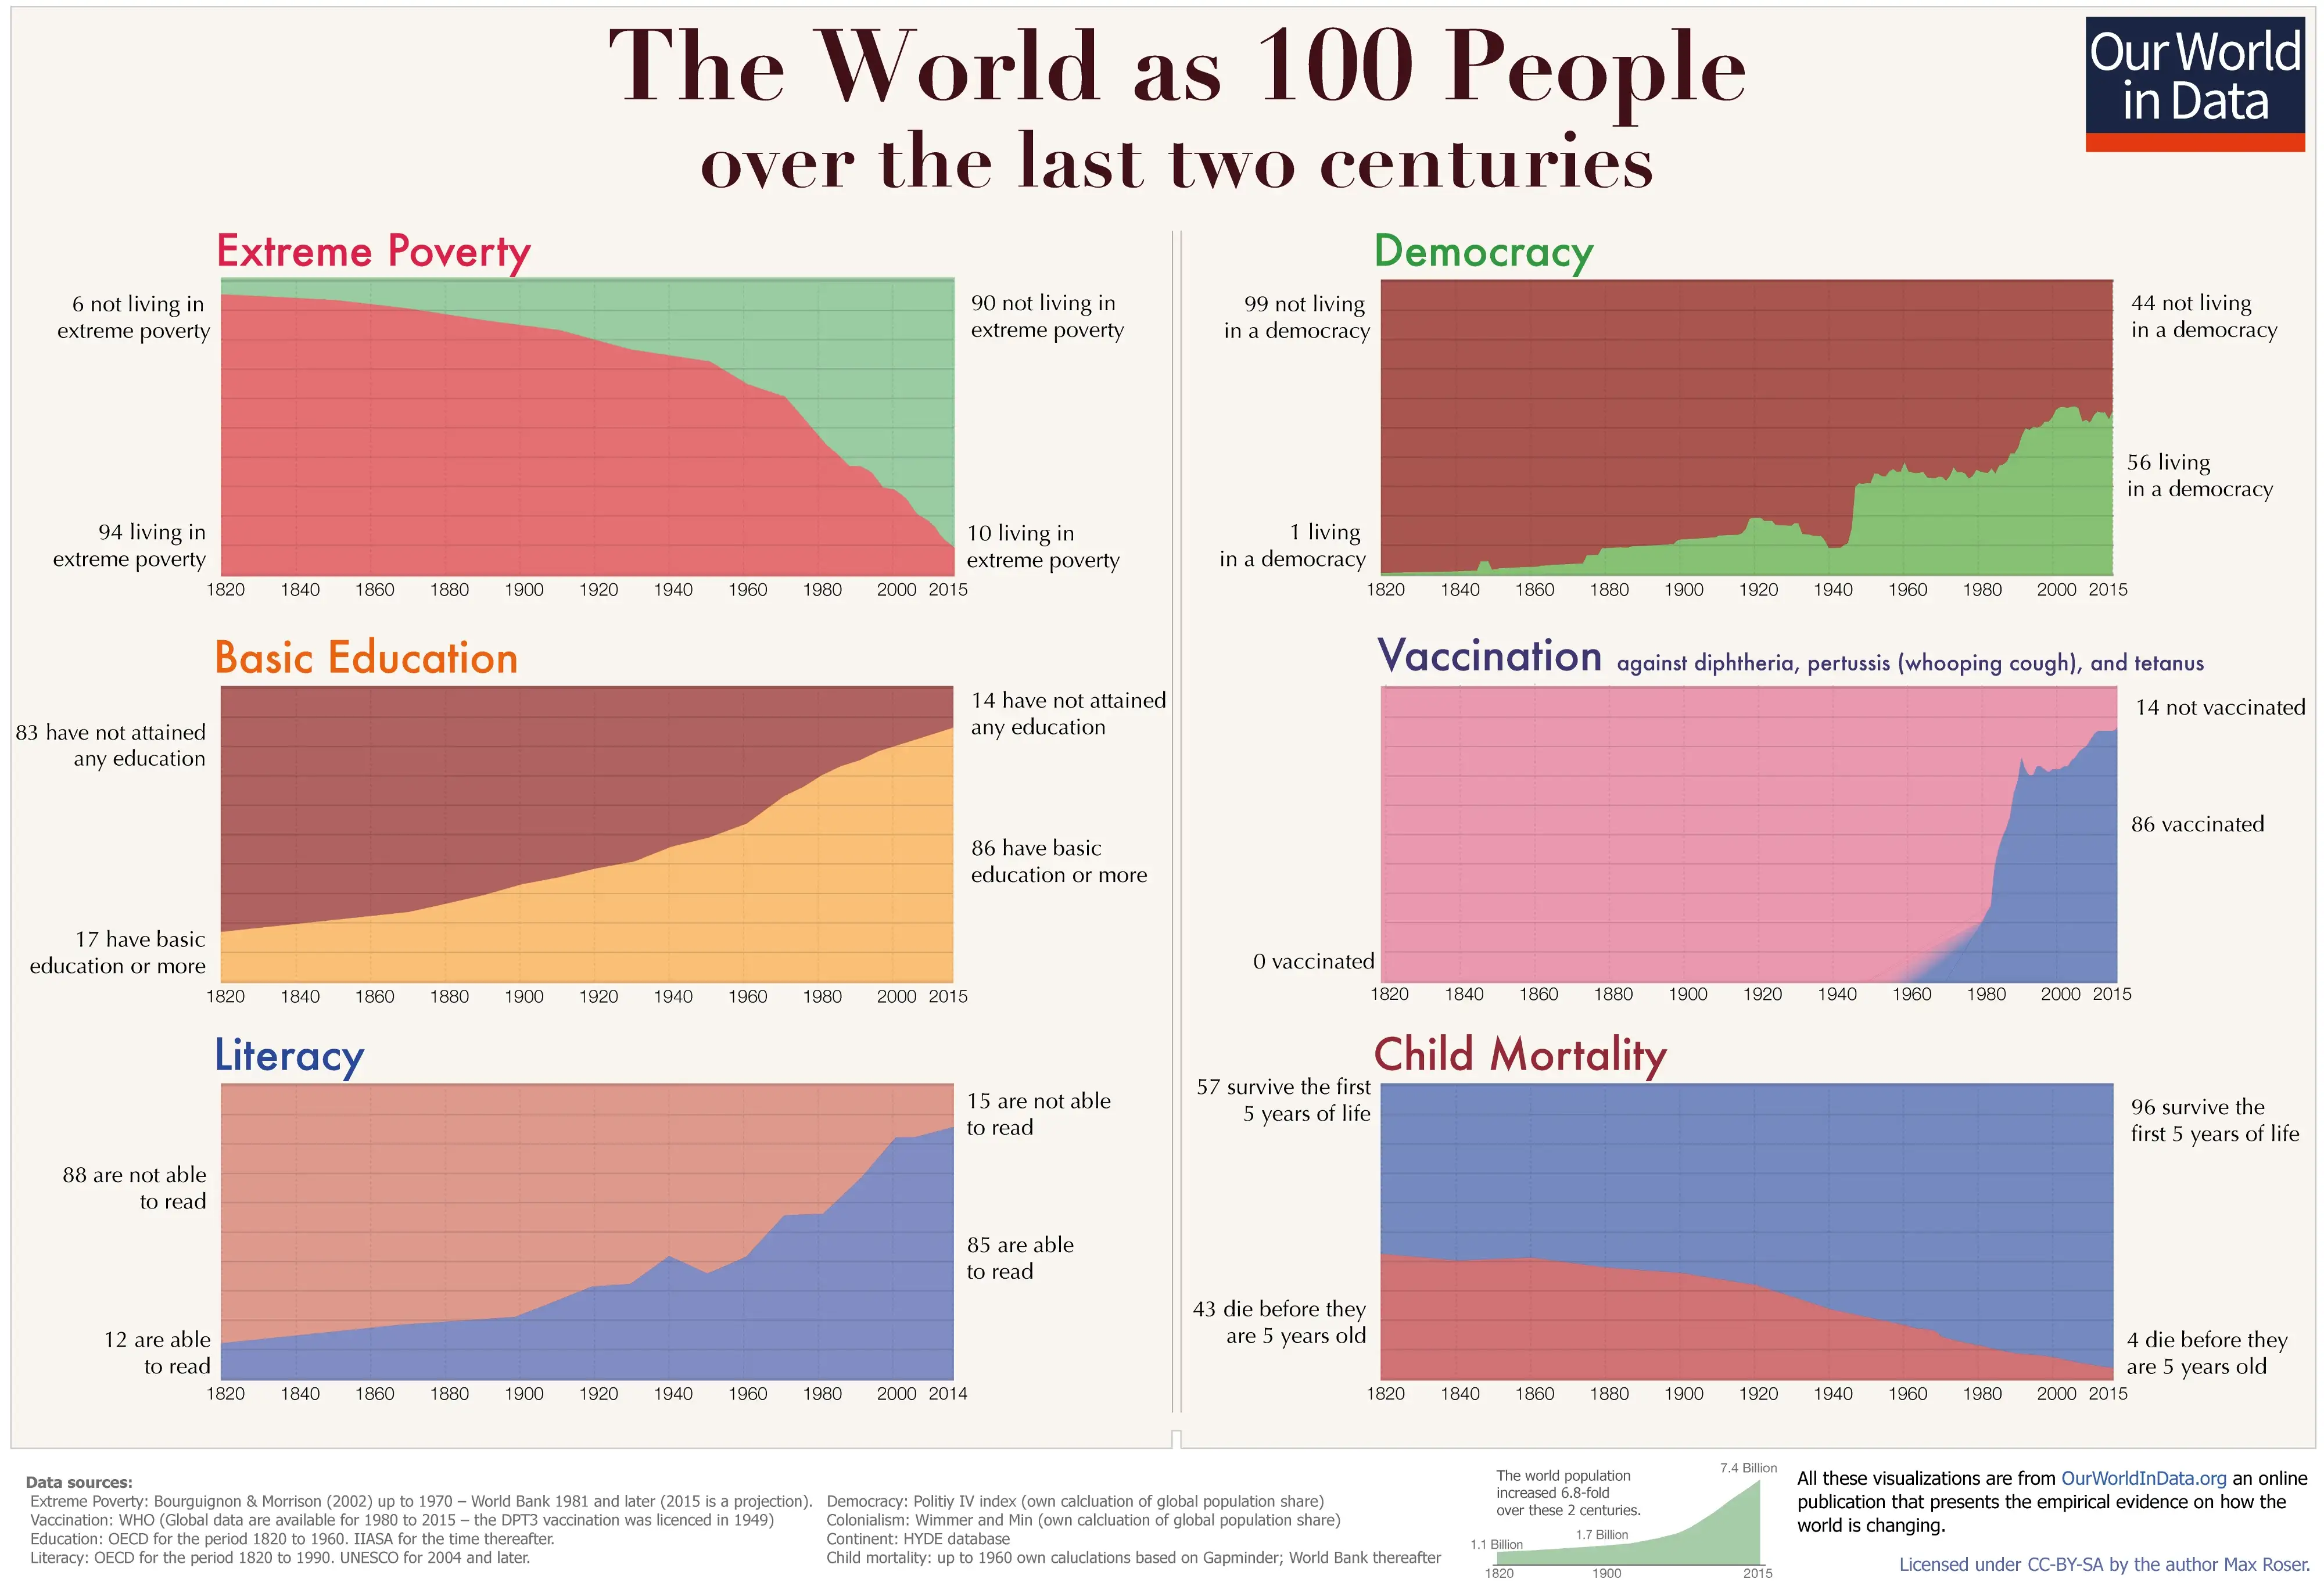 Charts of improvements in extreme poverty, basic education, literacy, democracy, vaccination, and child mortality in the world over the last two centuries